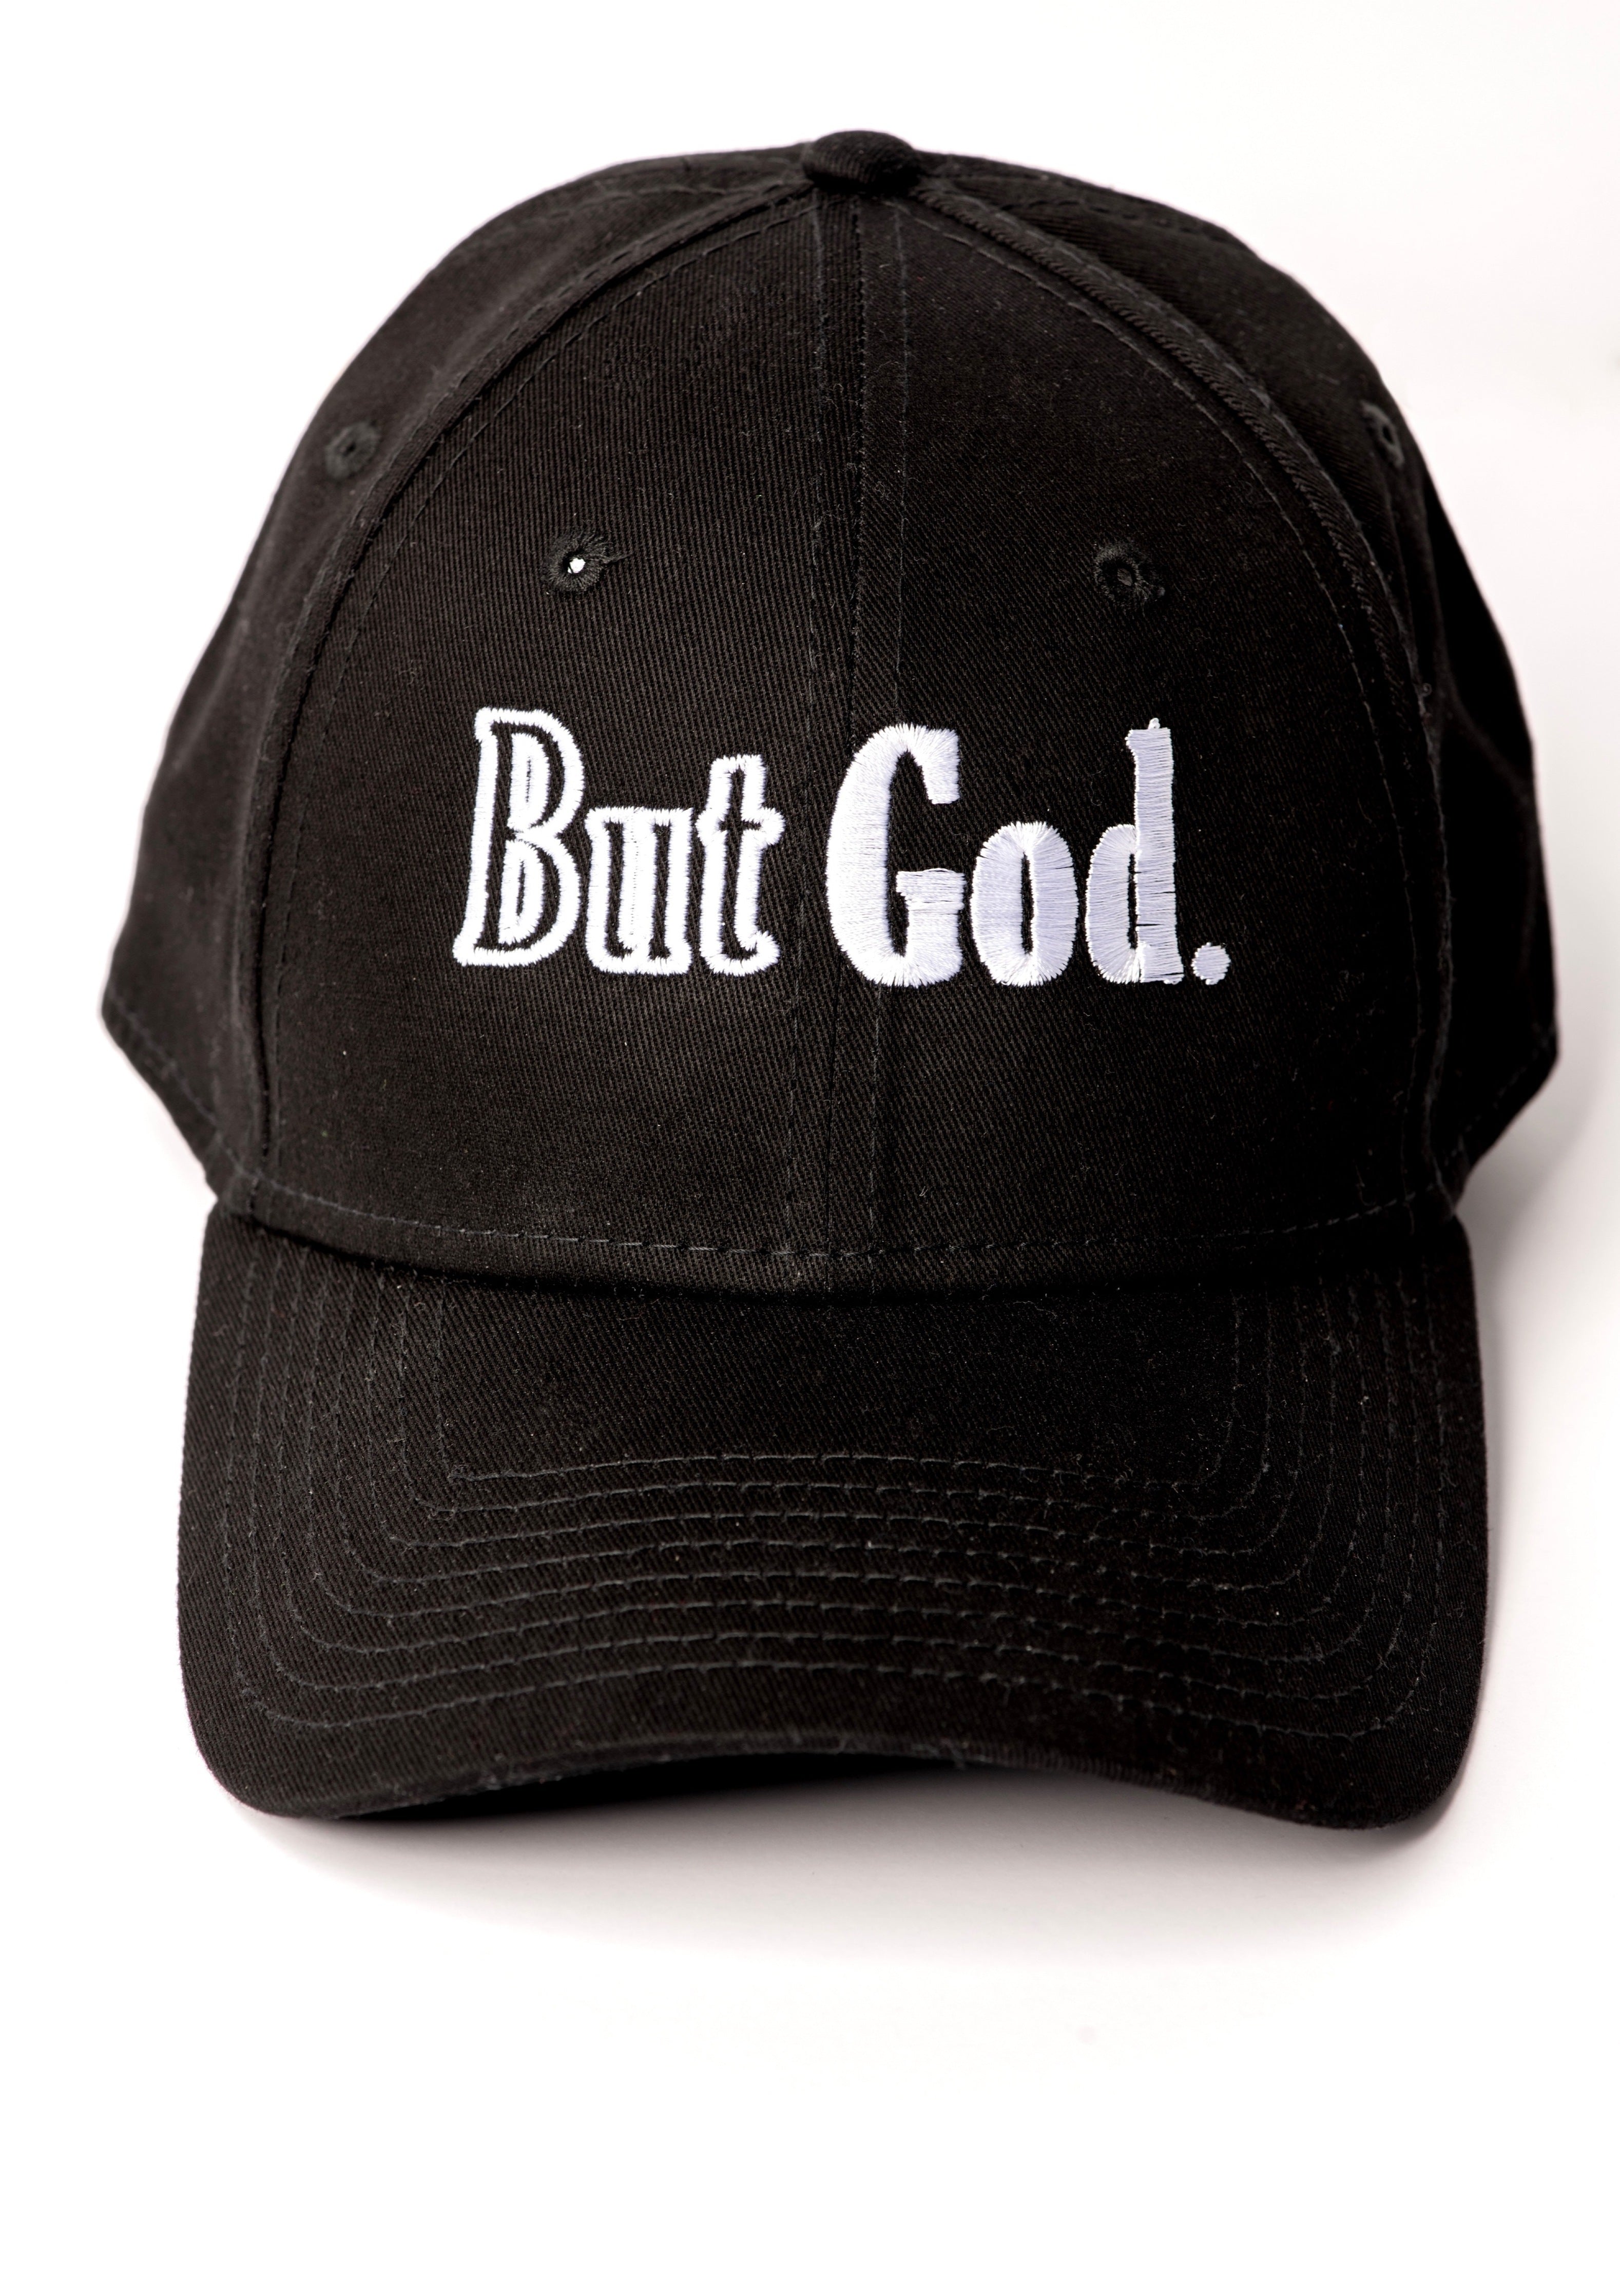 But God Hat - Jewellery Unique Gifts & Accessories